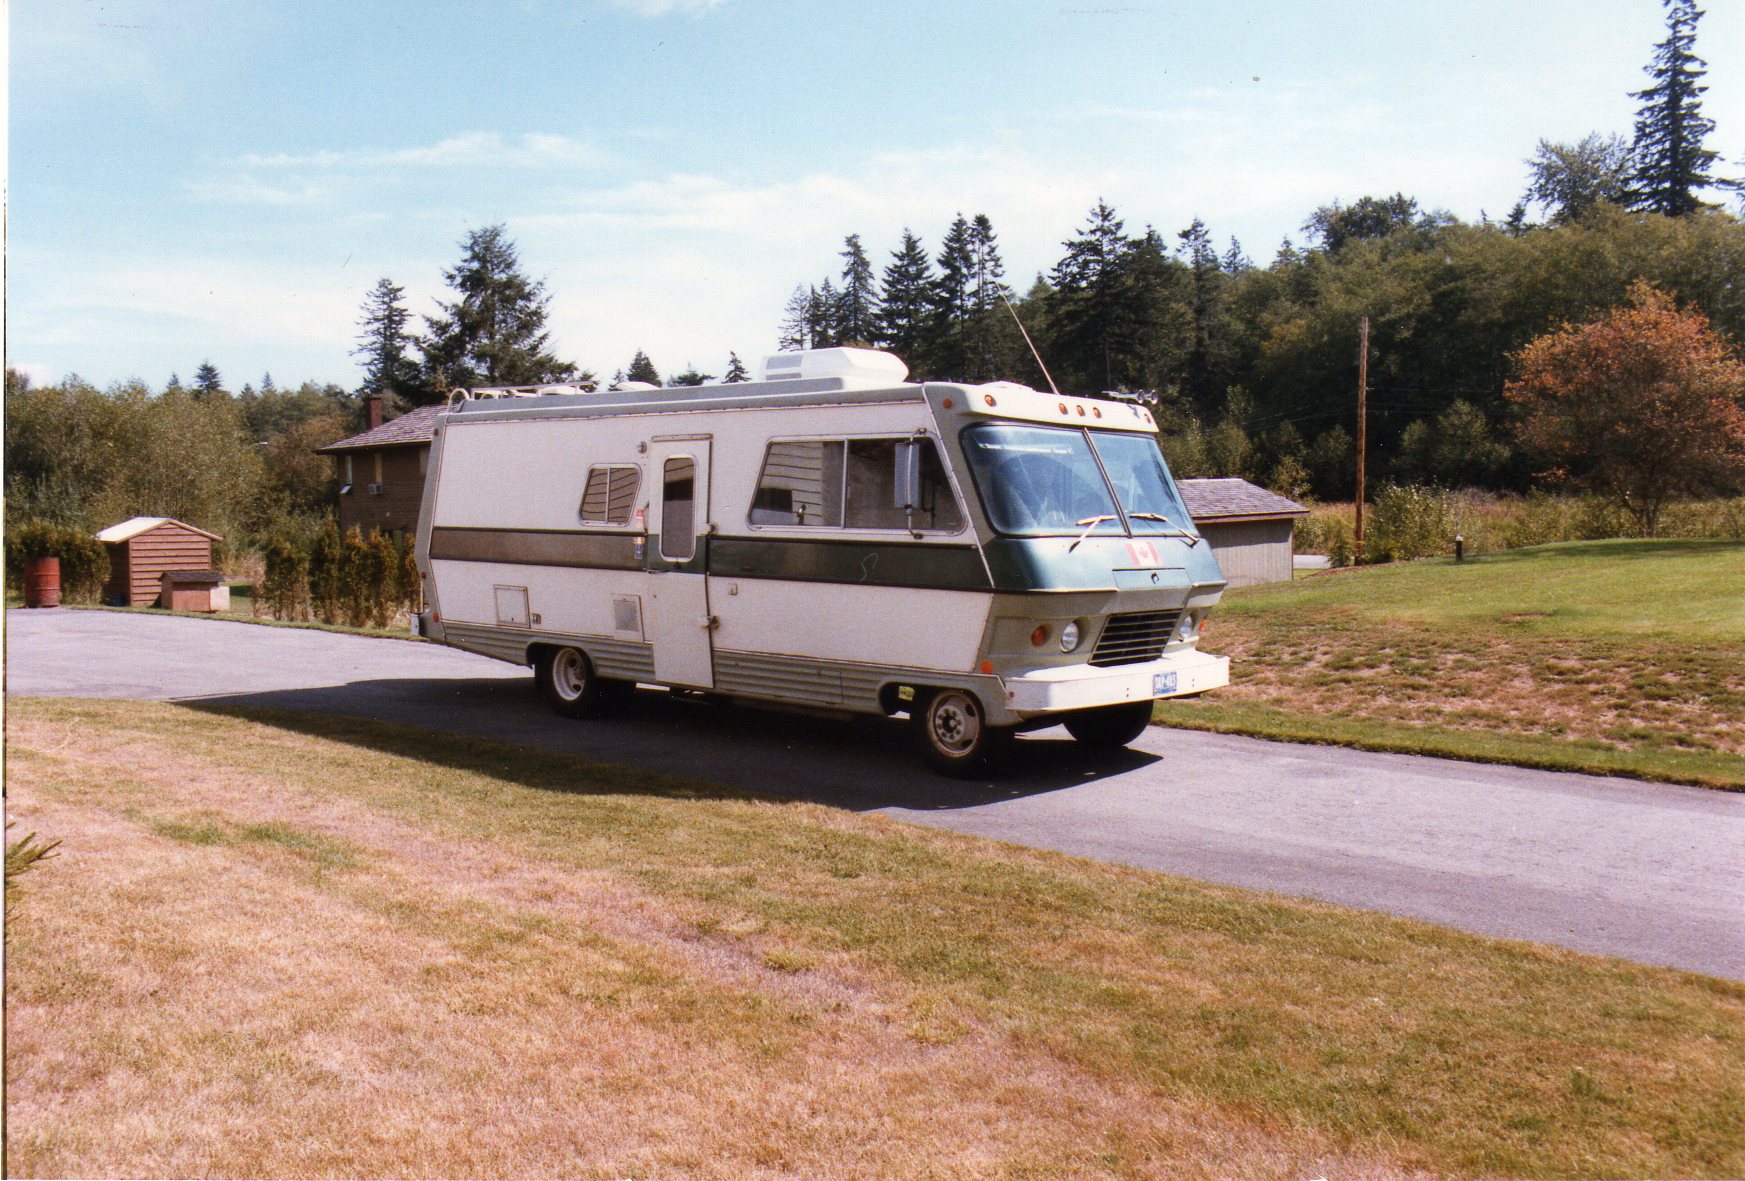 Old RV parked on a road.